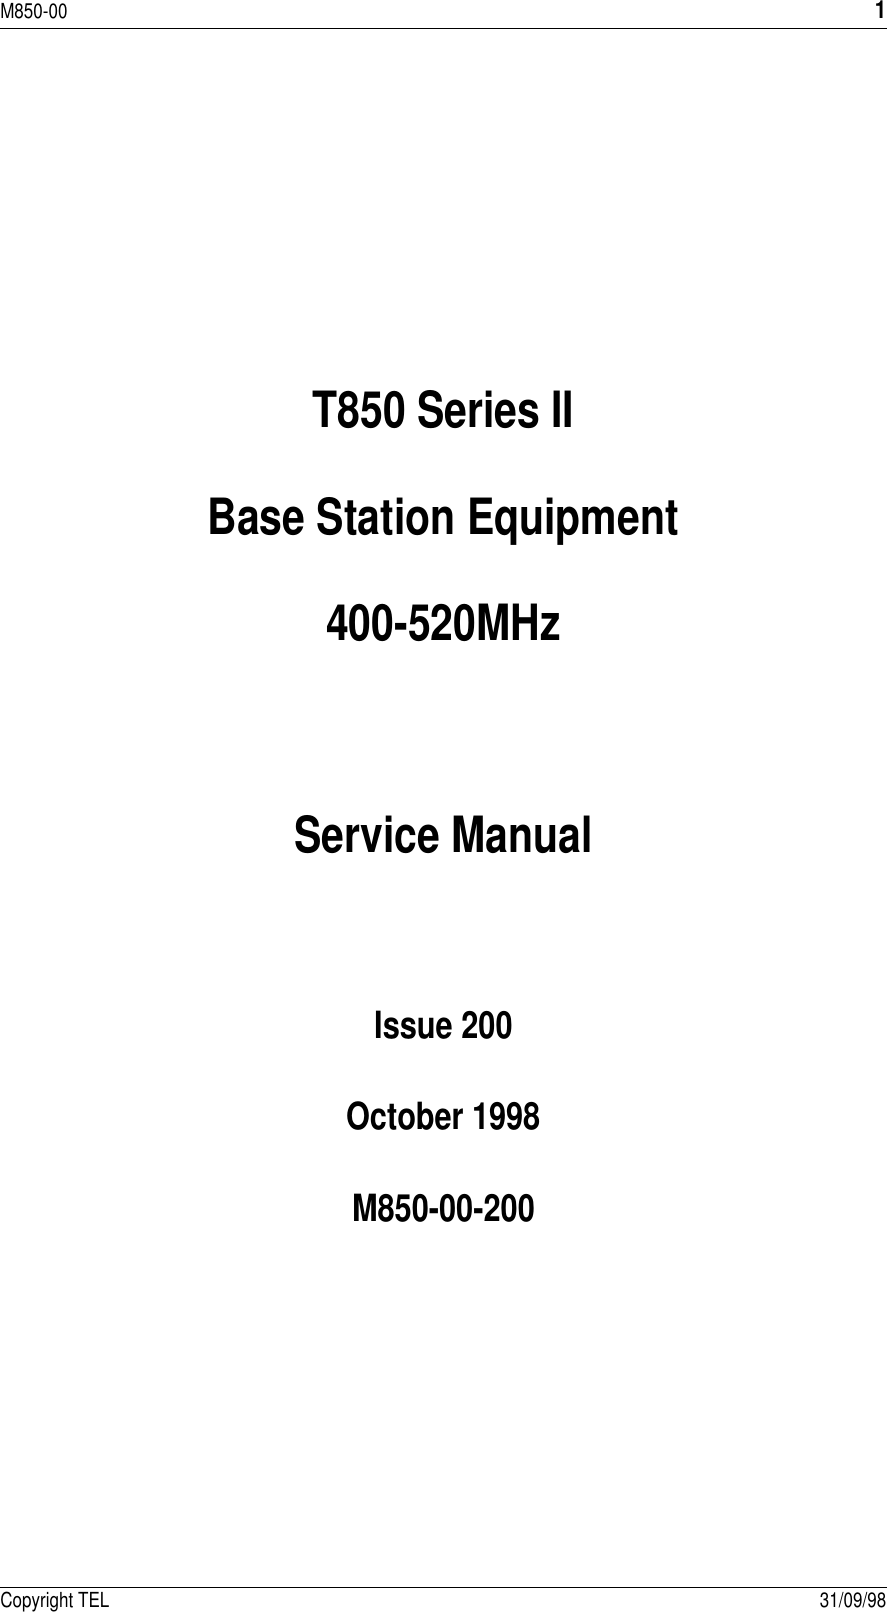 M850-001Copyright TEL 31/09/98T850 Series IIBase Station Equipment400-520MHzService ManualIssue 200October 1998M850-00-200